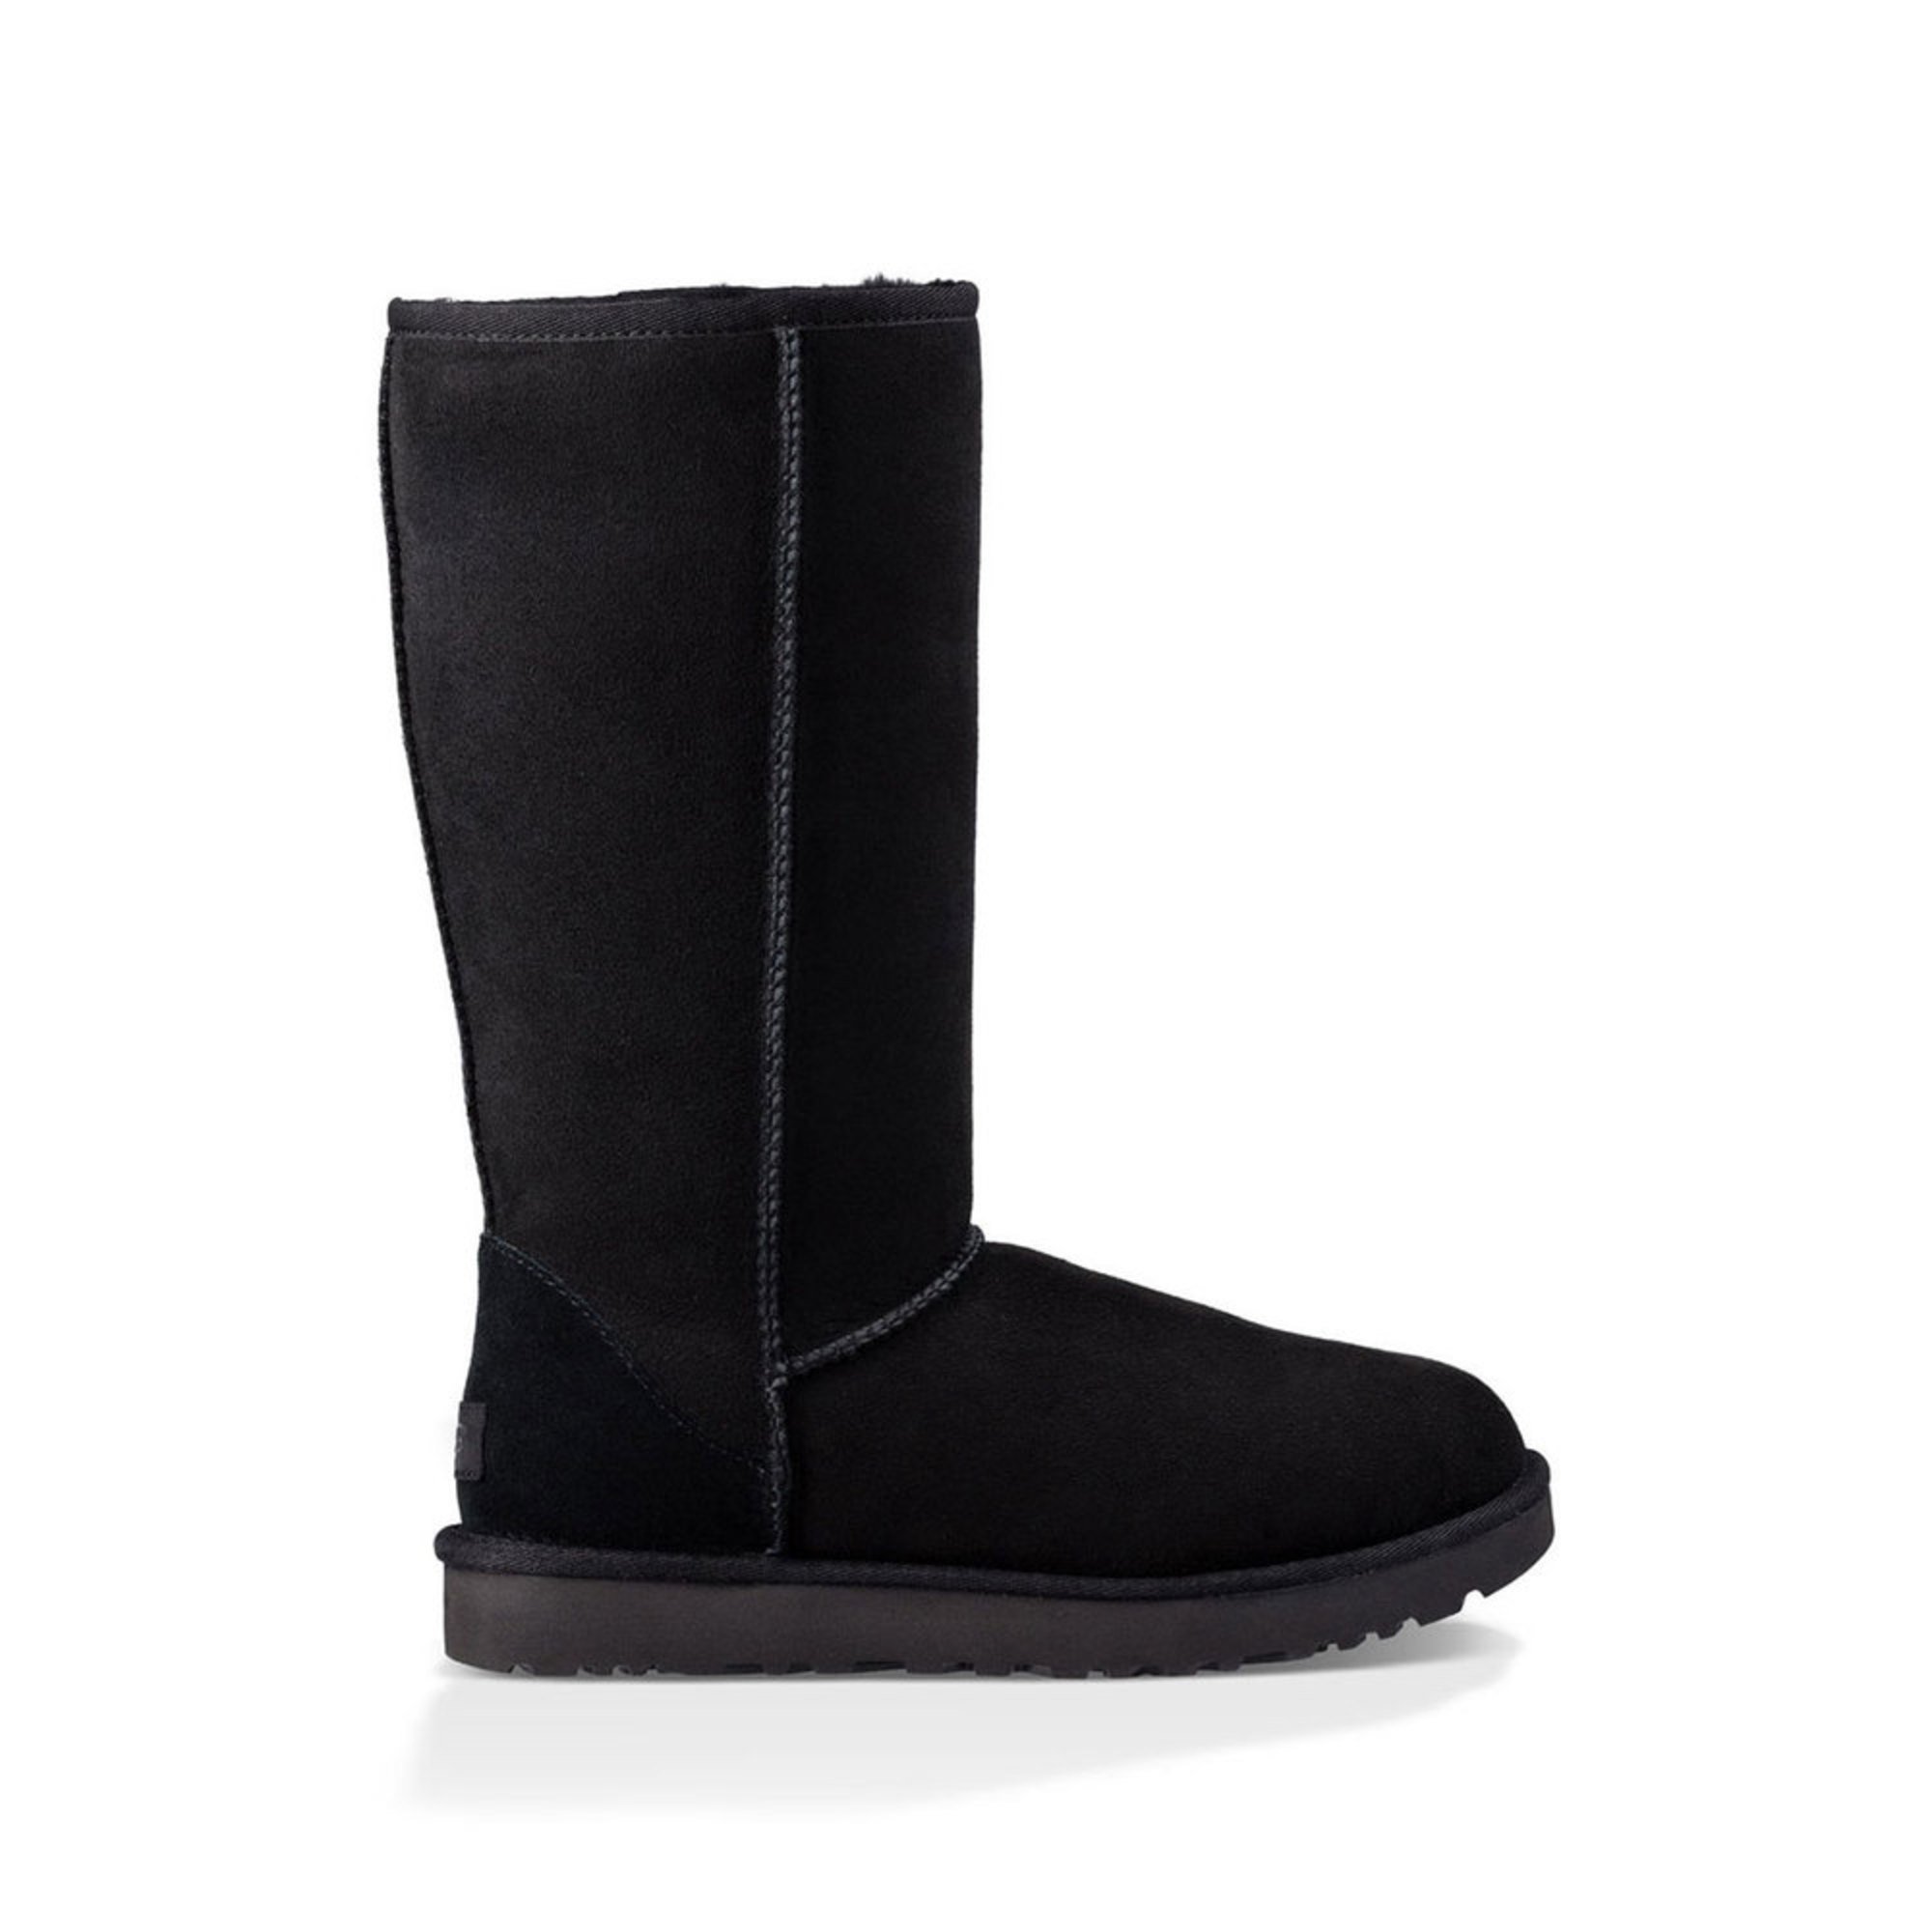 Ugg Women's Classic Tall Ii Boot | Cold Weather Boots | Shoes - Shop ...